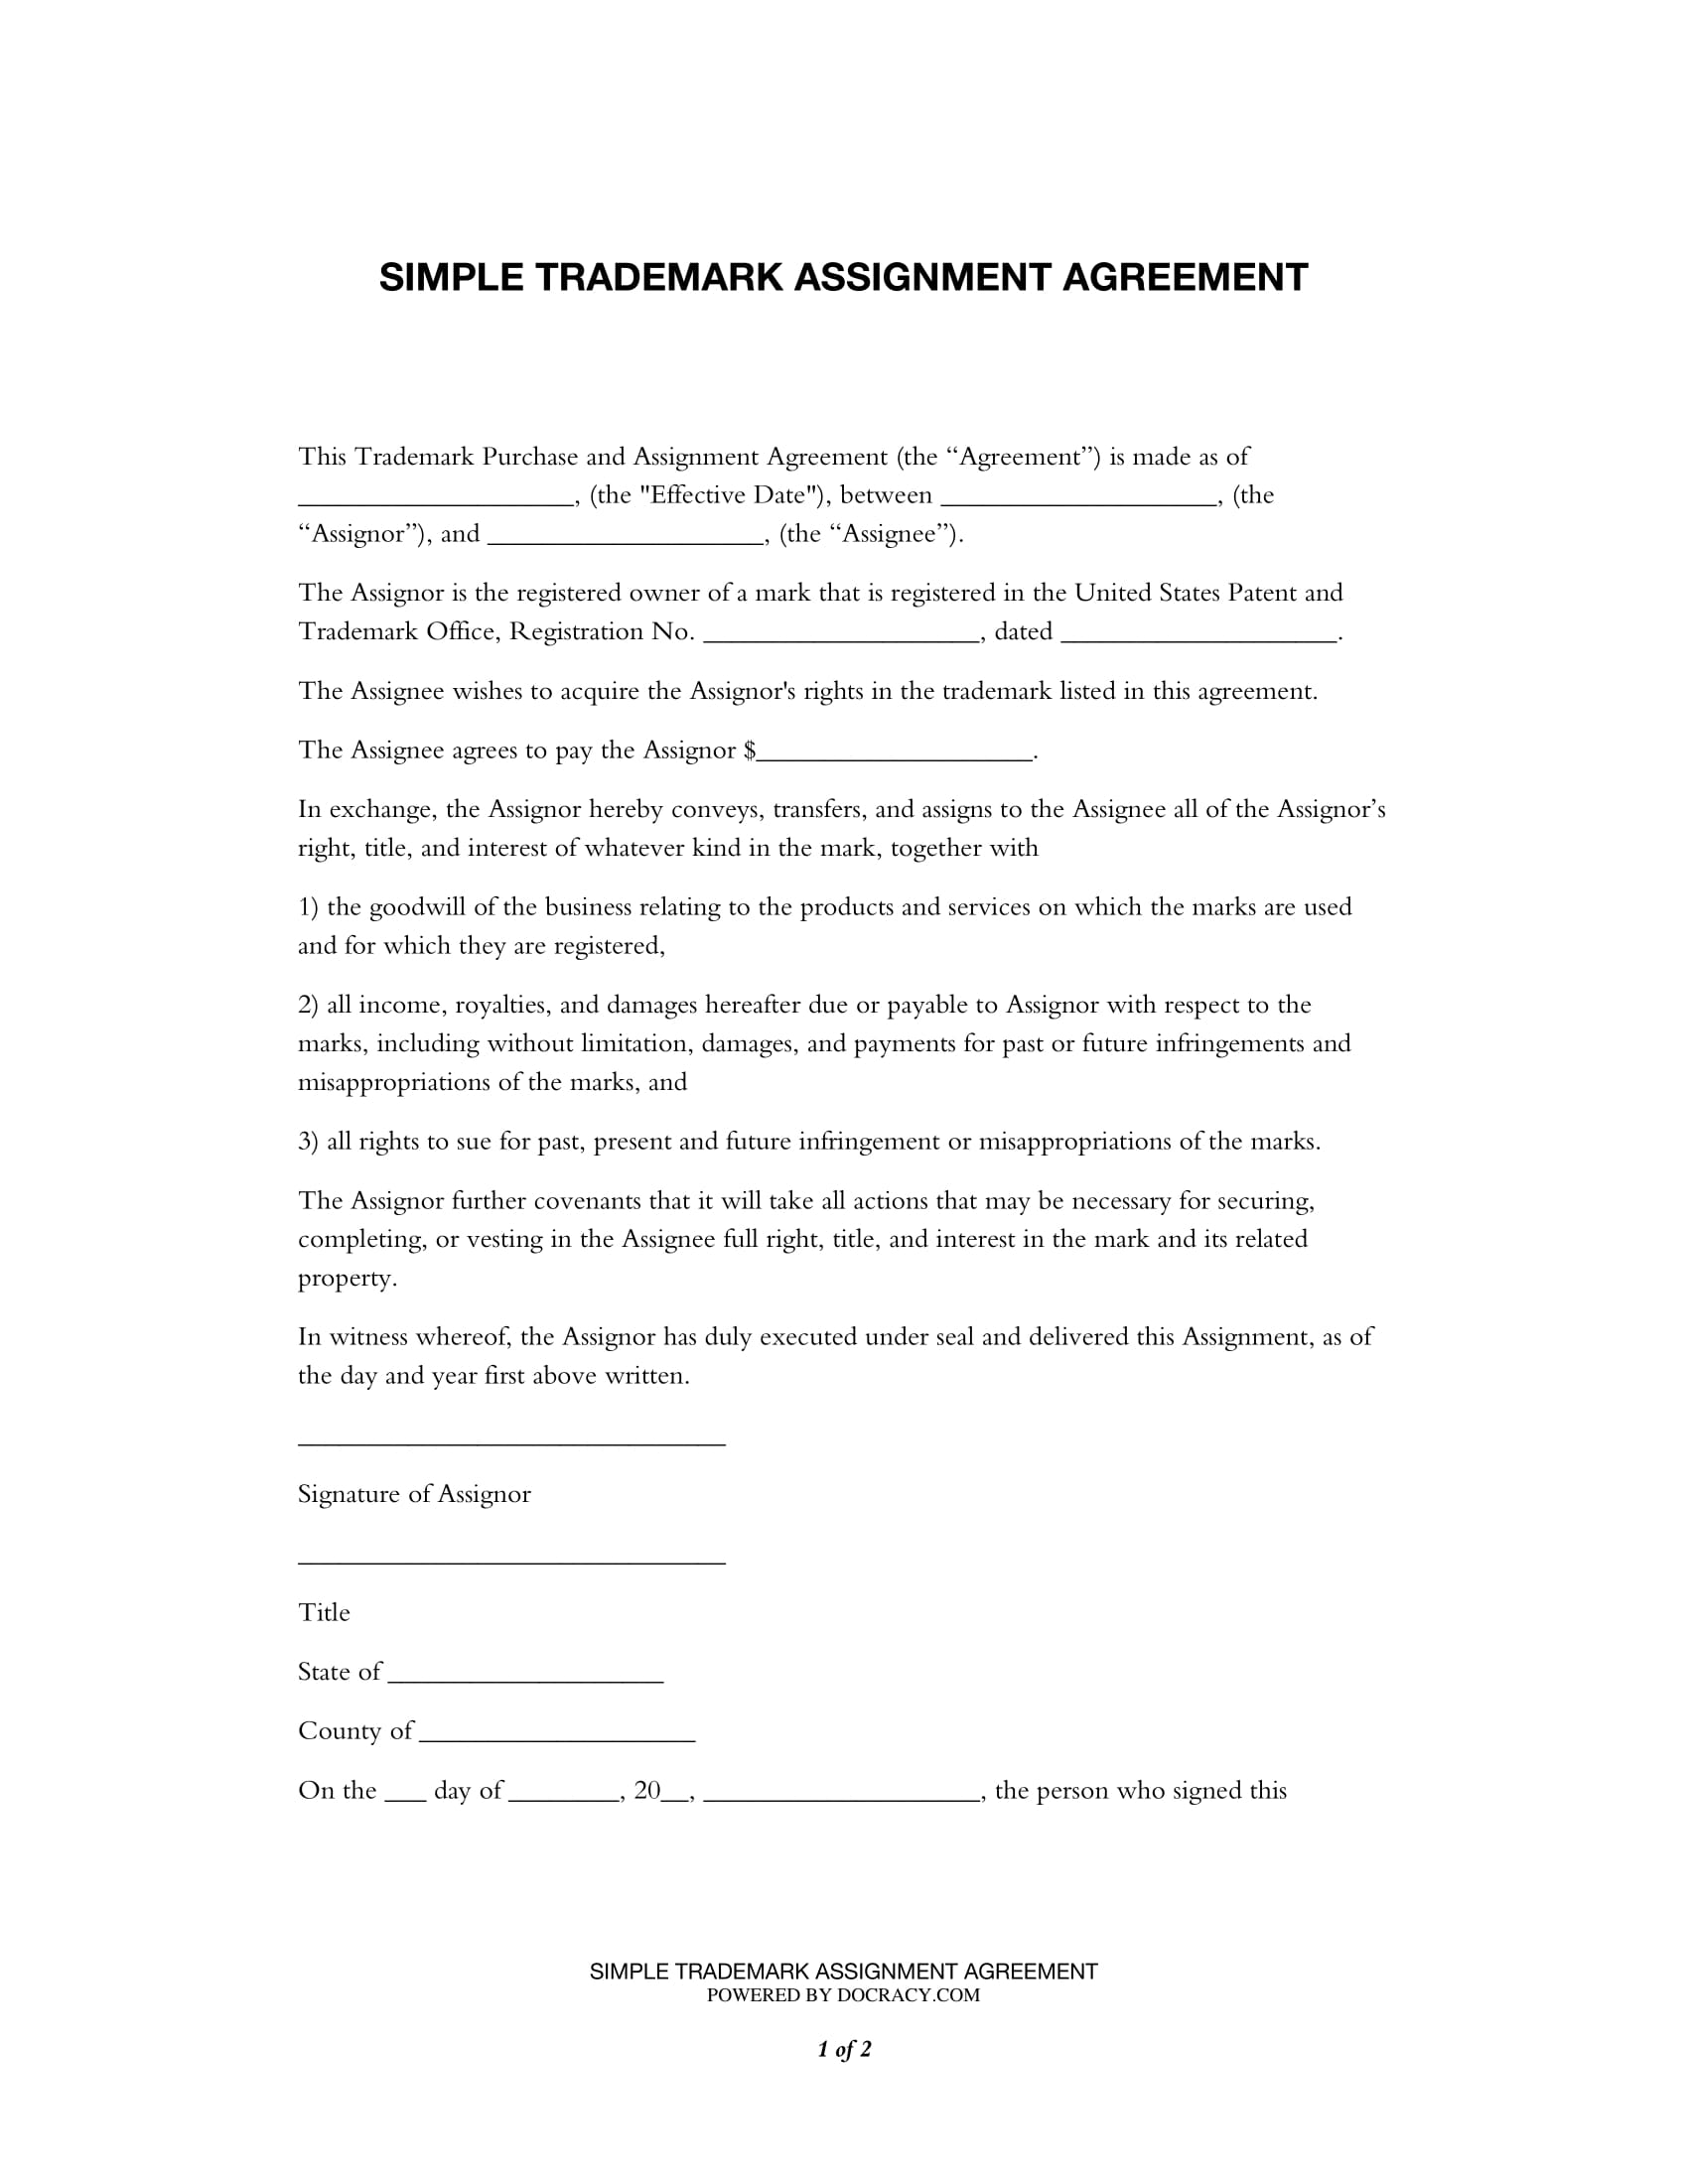 simple trademark assignment agreement 1